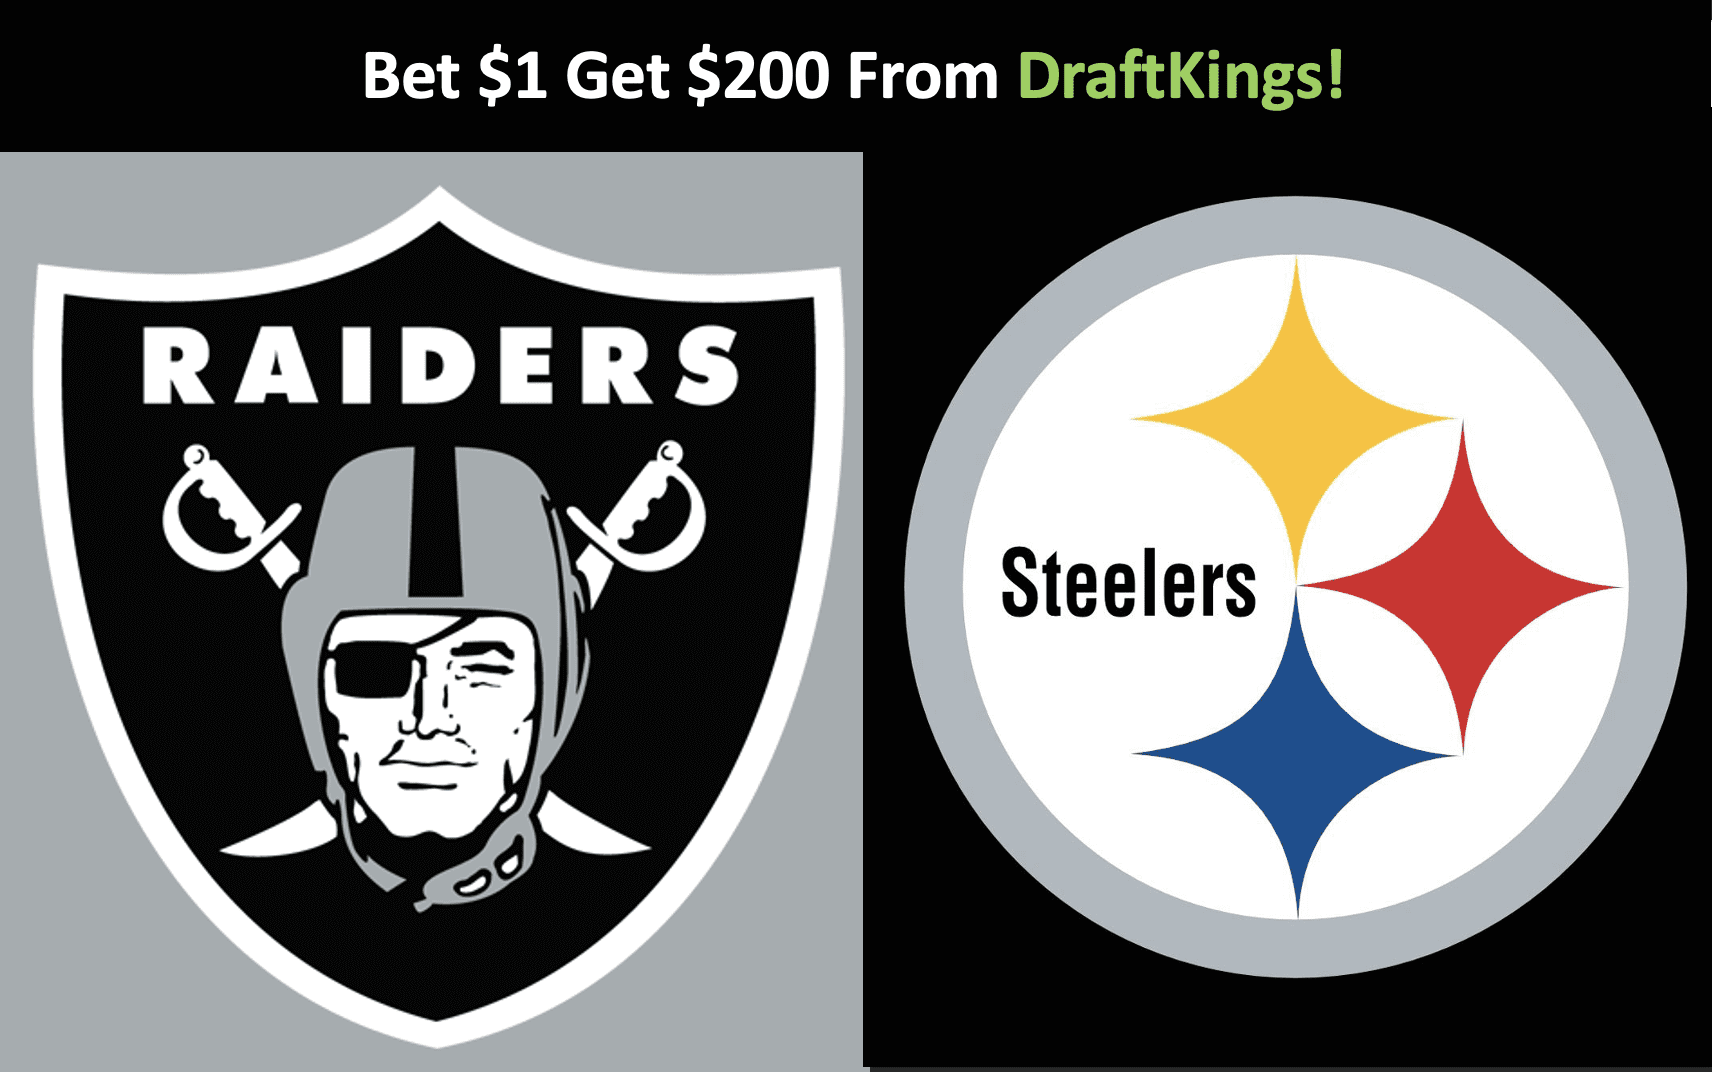 pittsburgh steelers tickets 2021